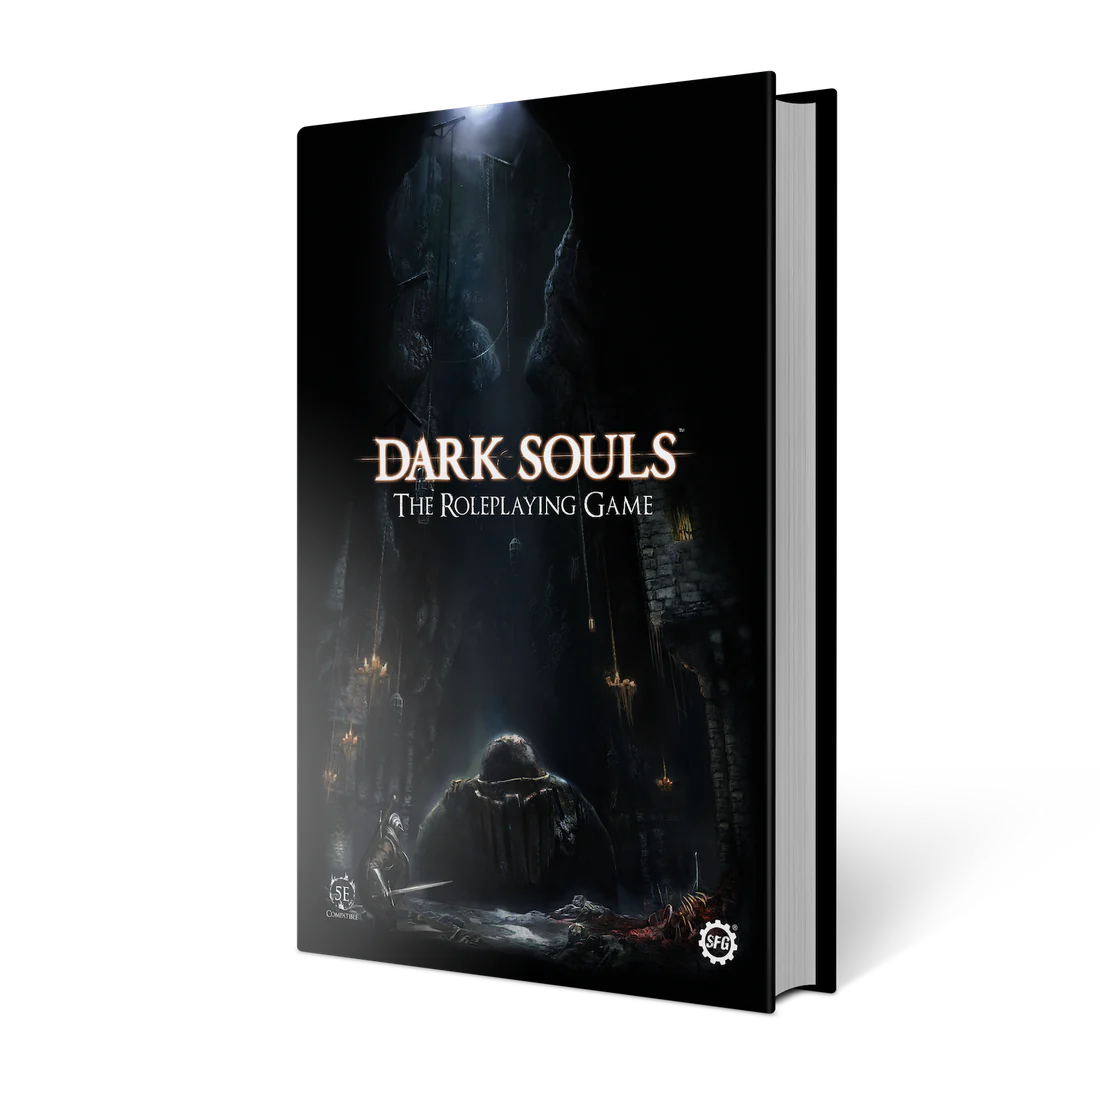 Dark Souls - The Roleplaying Game - Loaded Dice Barry Vale of Glamorgan CF64 3HD